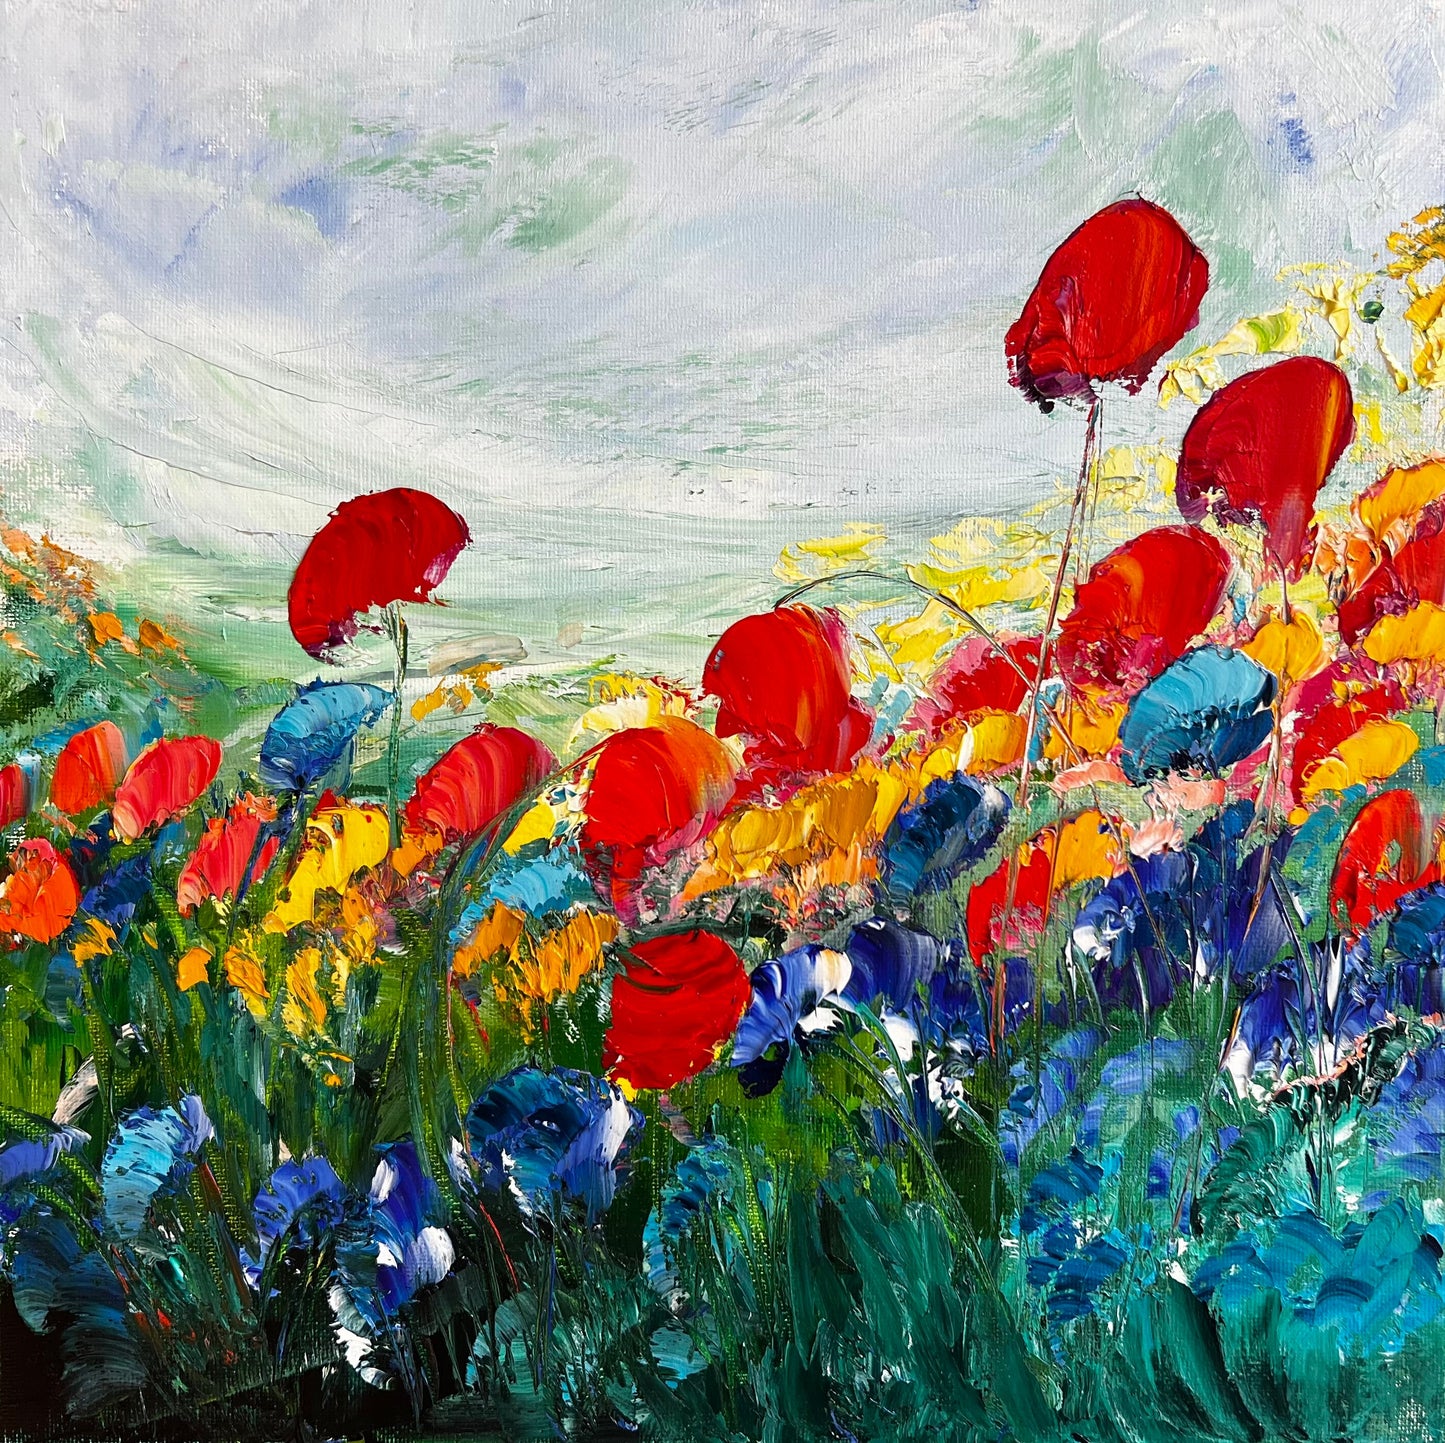 Unruly Poppies, OIL, 12" X 12"